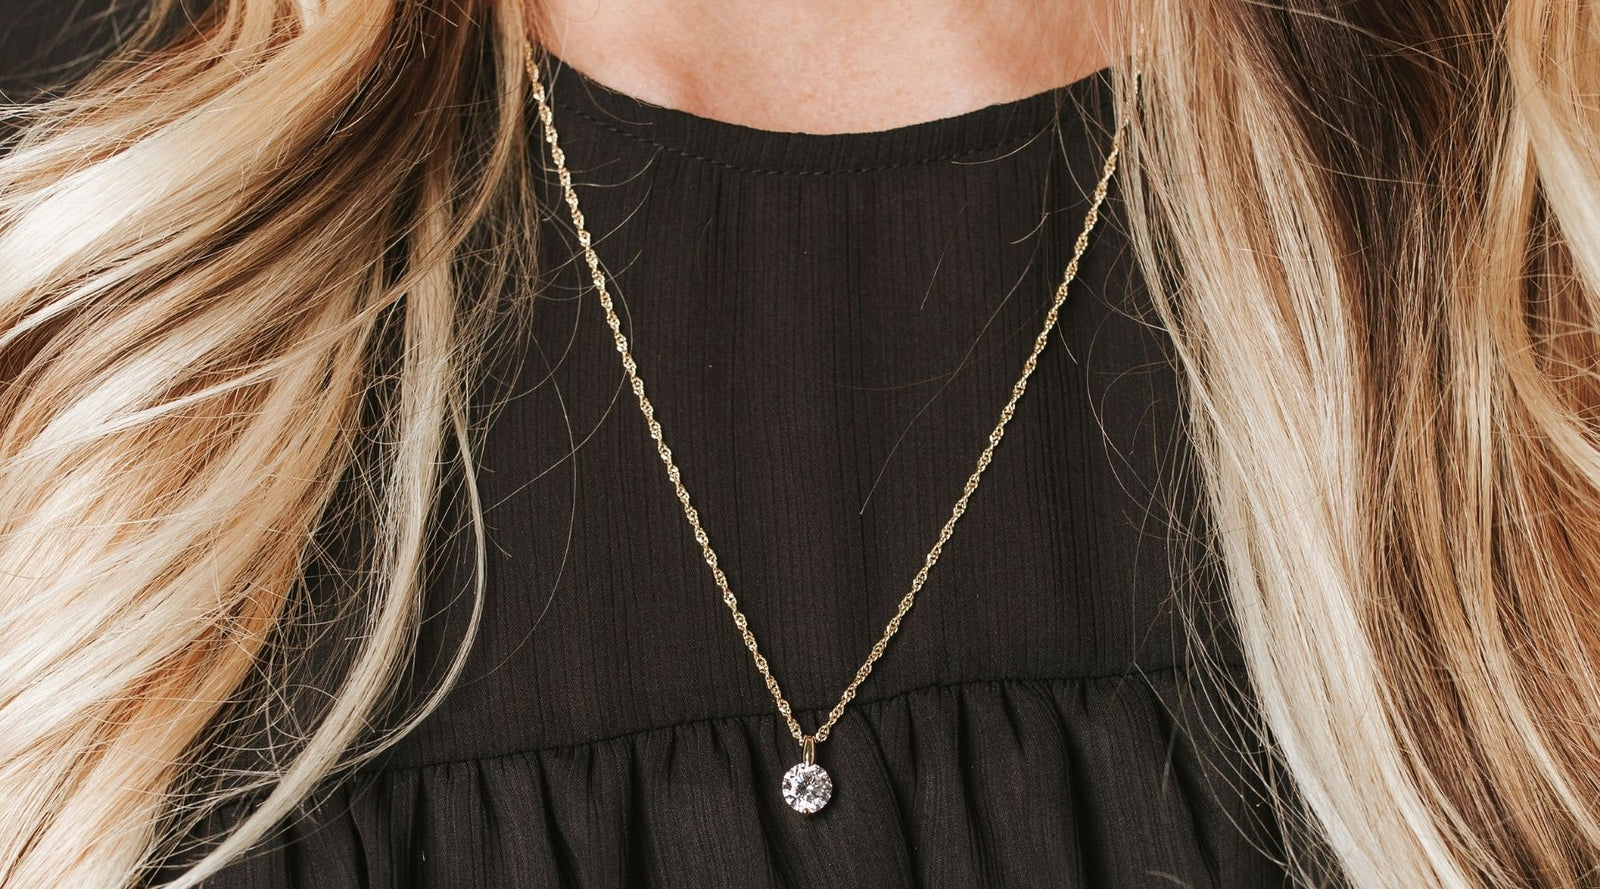 The chokers you loved in the third grade are back in style